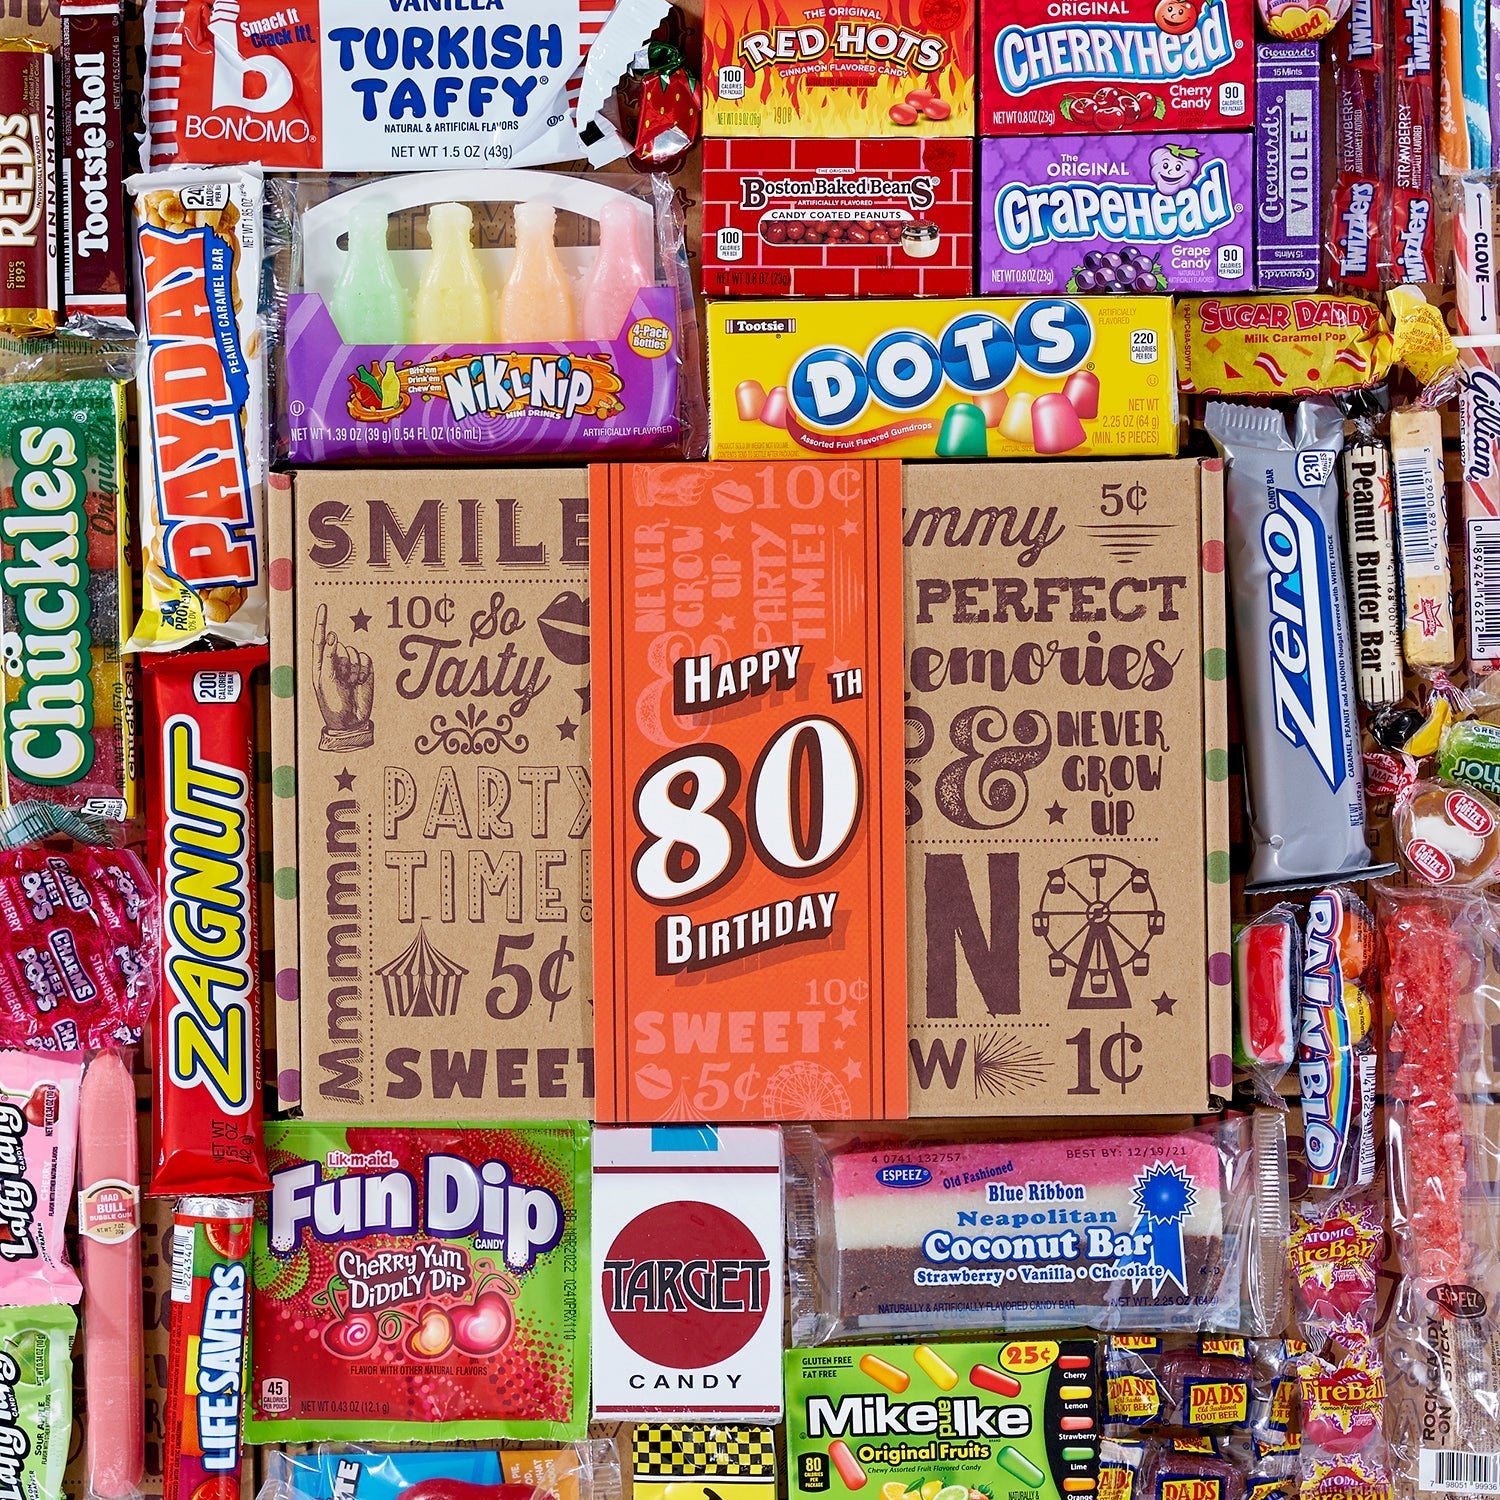 80th Birthday Retro Candy Gift - Vintage Candy Co.